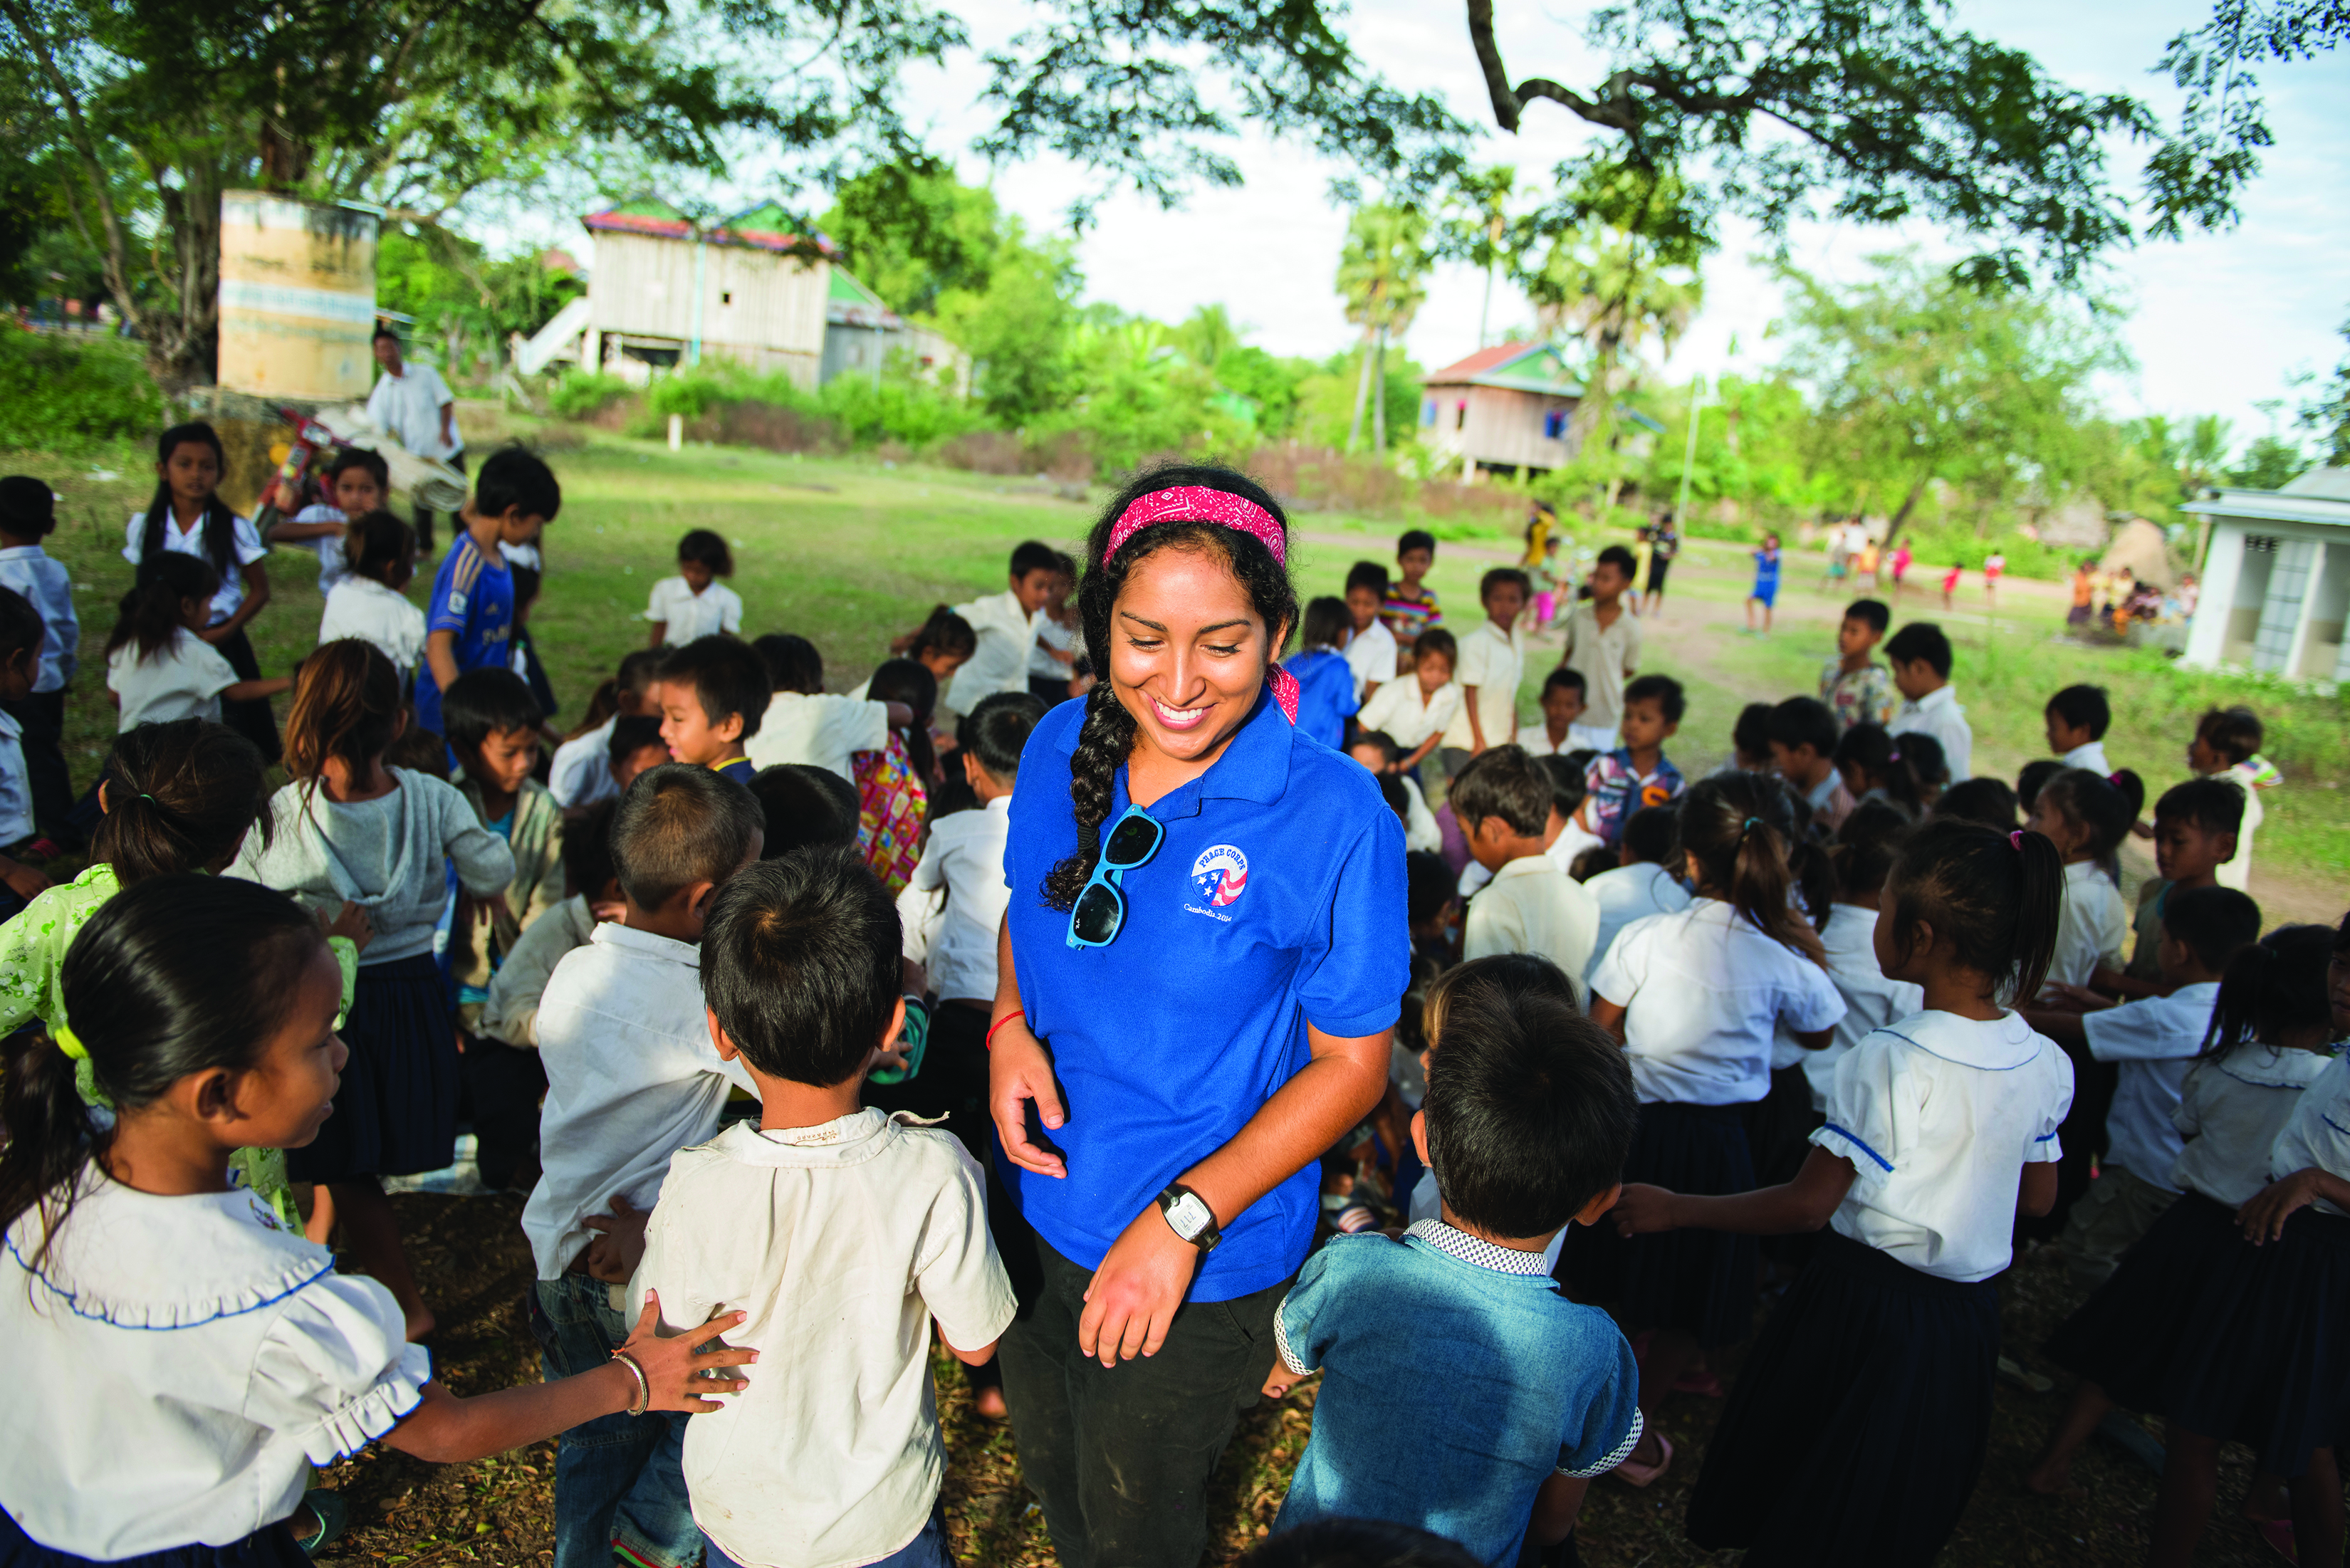 Source: Peace Corps, A Peace Corps Volunteer serves in Cambodia.